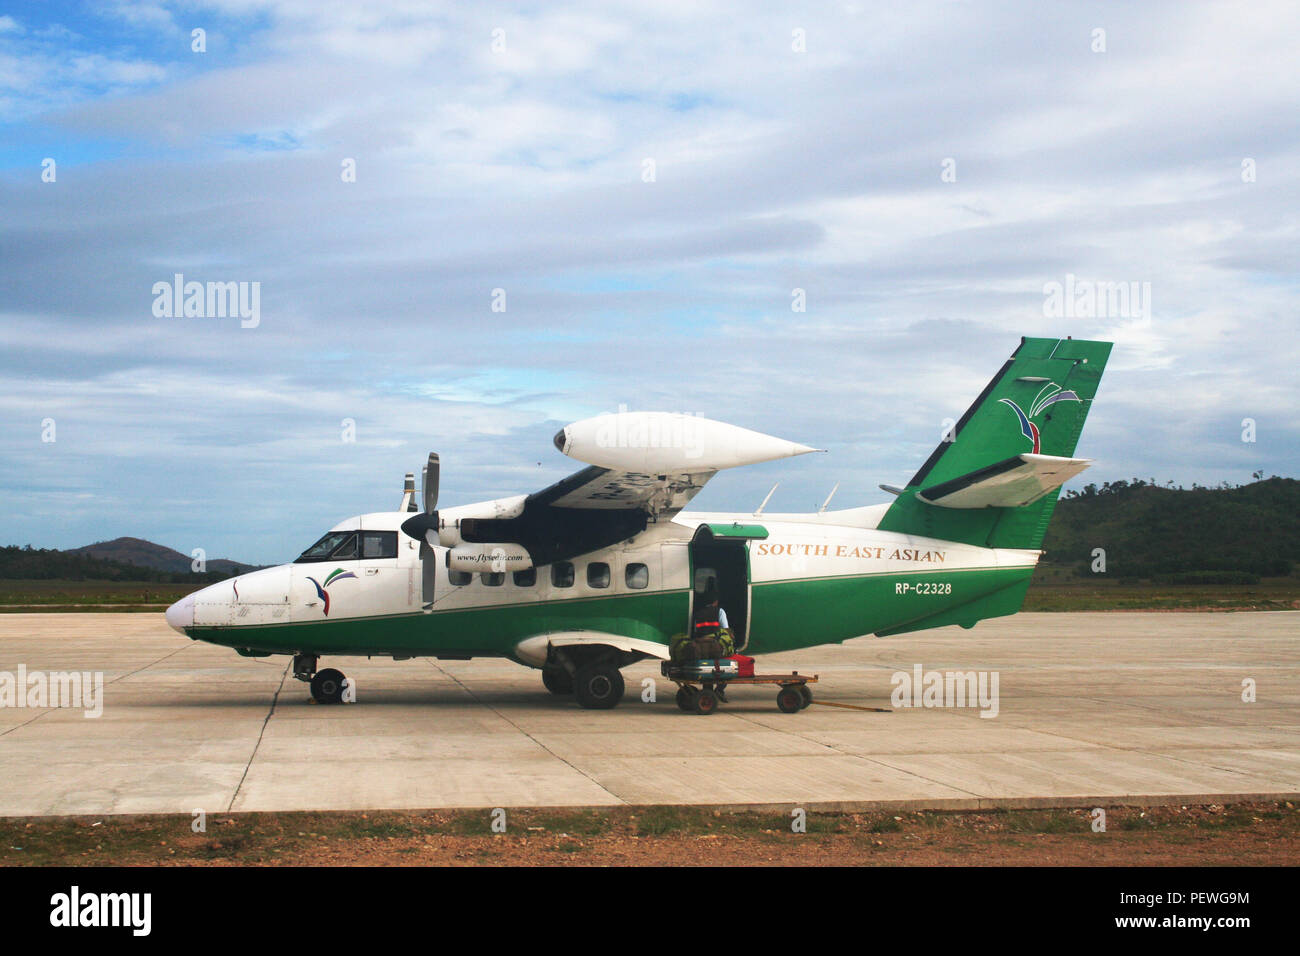 South-East-Asian-Airlines, Let L-410 Turbojet, aircraft Registration RP-C2328, Coron airport, Philippines. Stock Photo